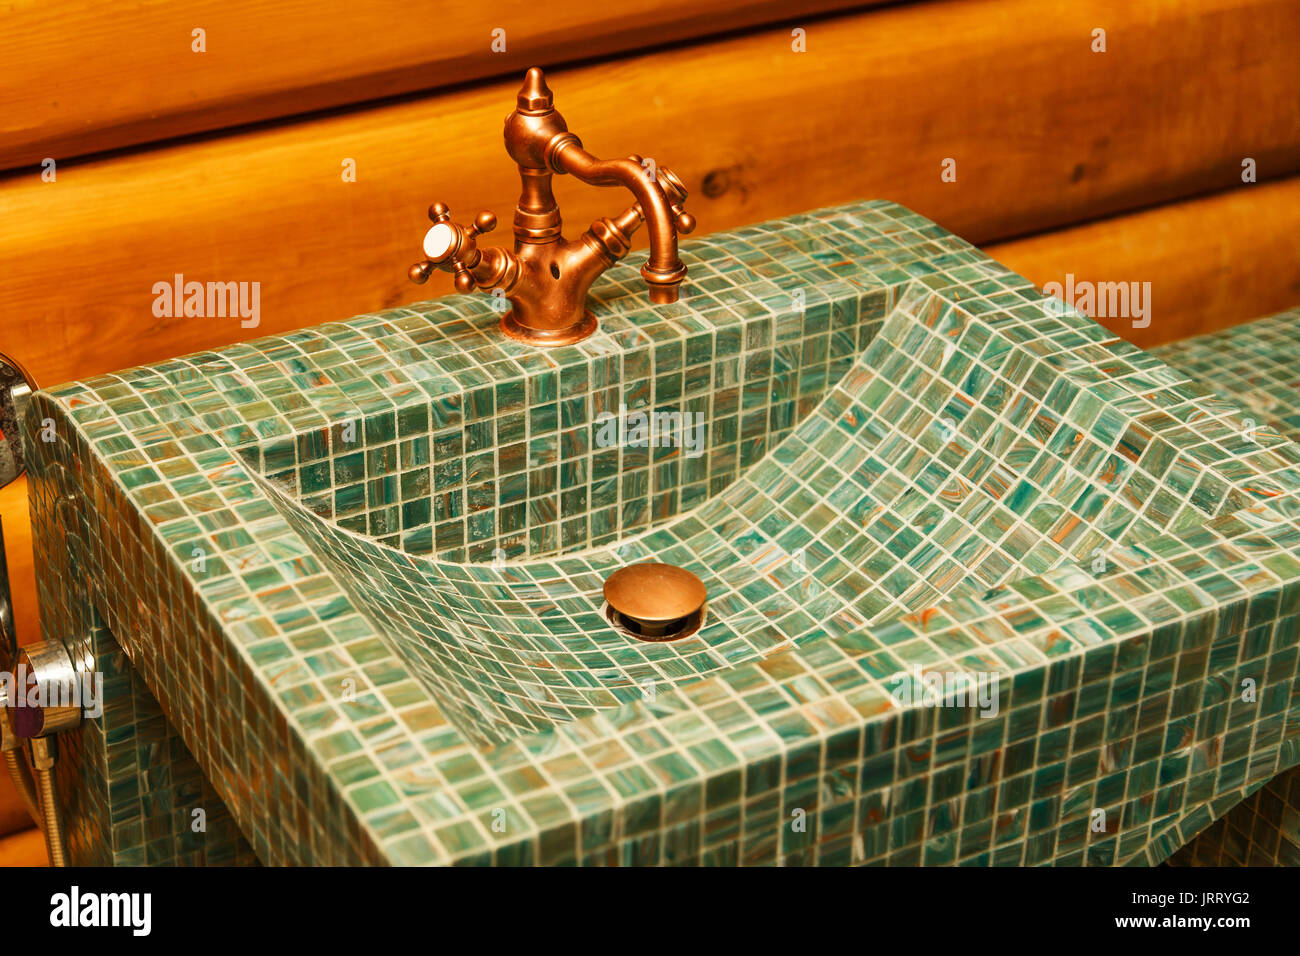 The Copper Faucet On An Wash Basin Made Of Green Mosaic Tile Stock Photo Alamy